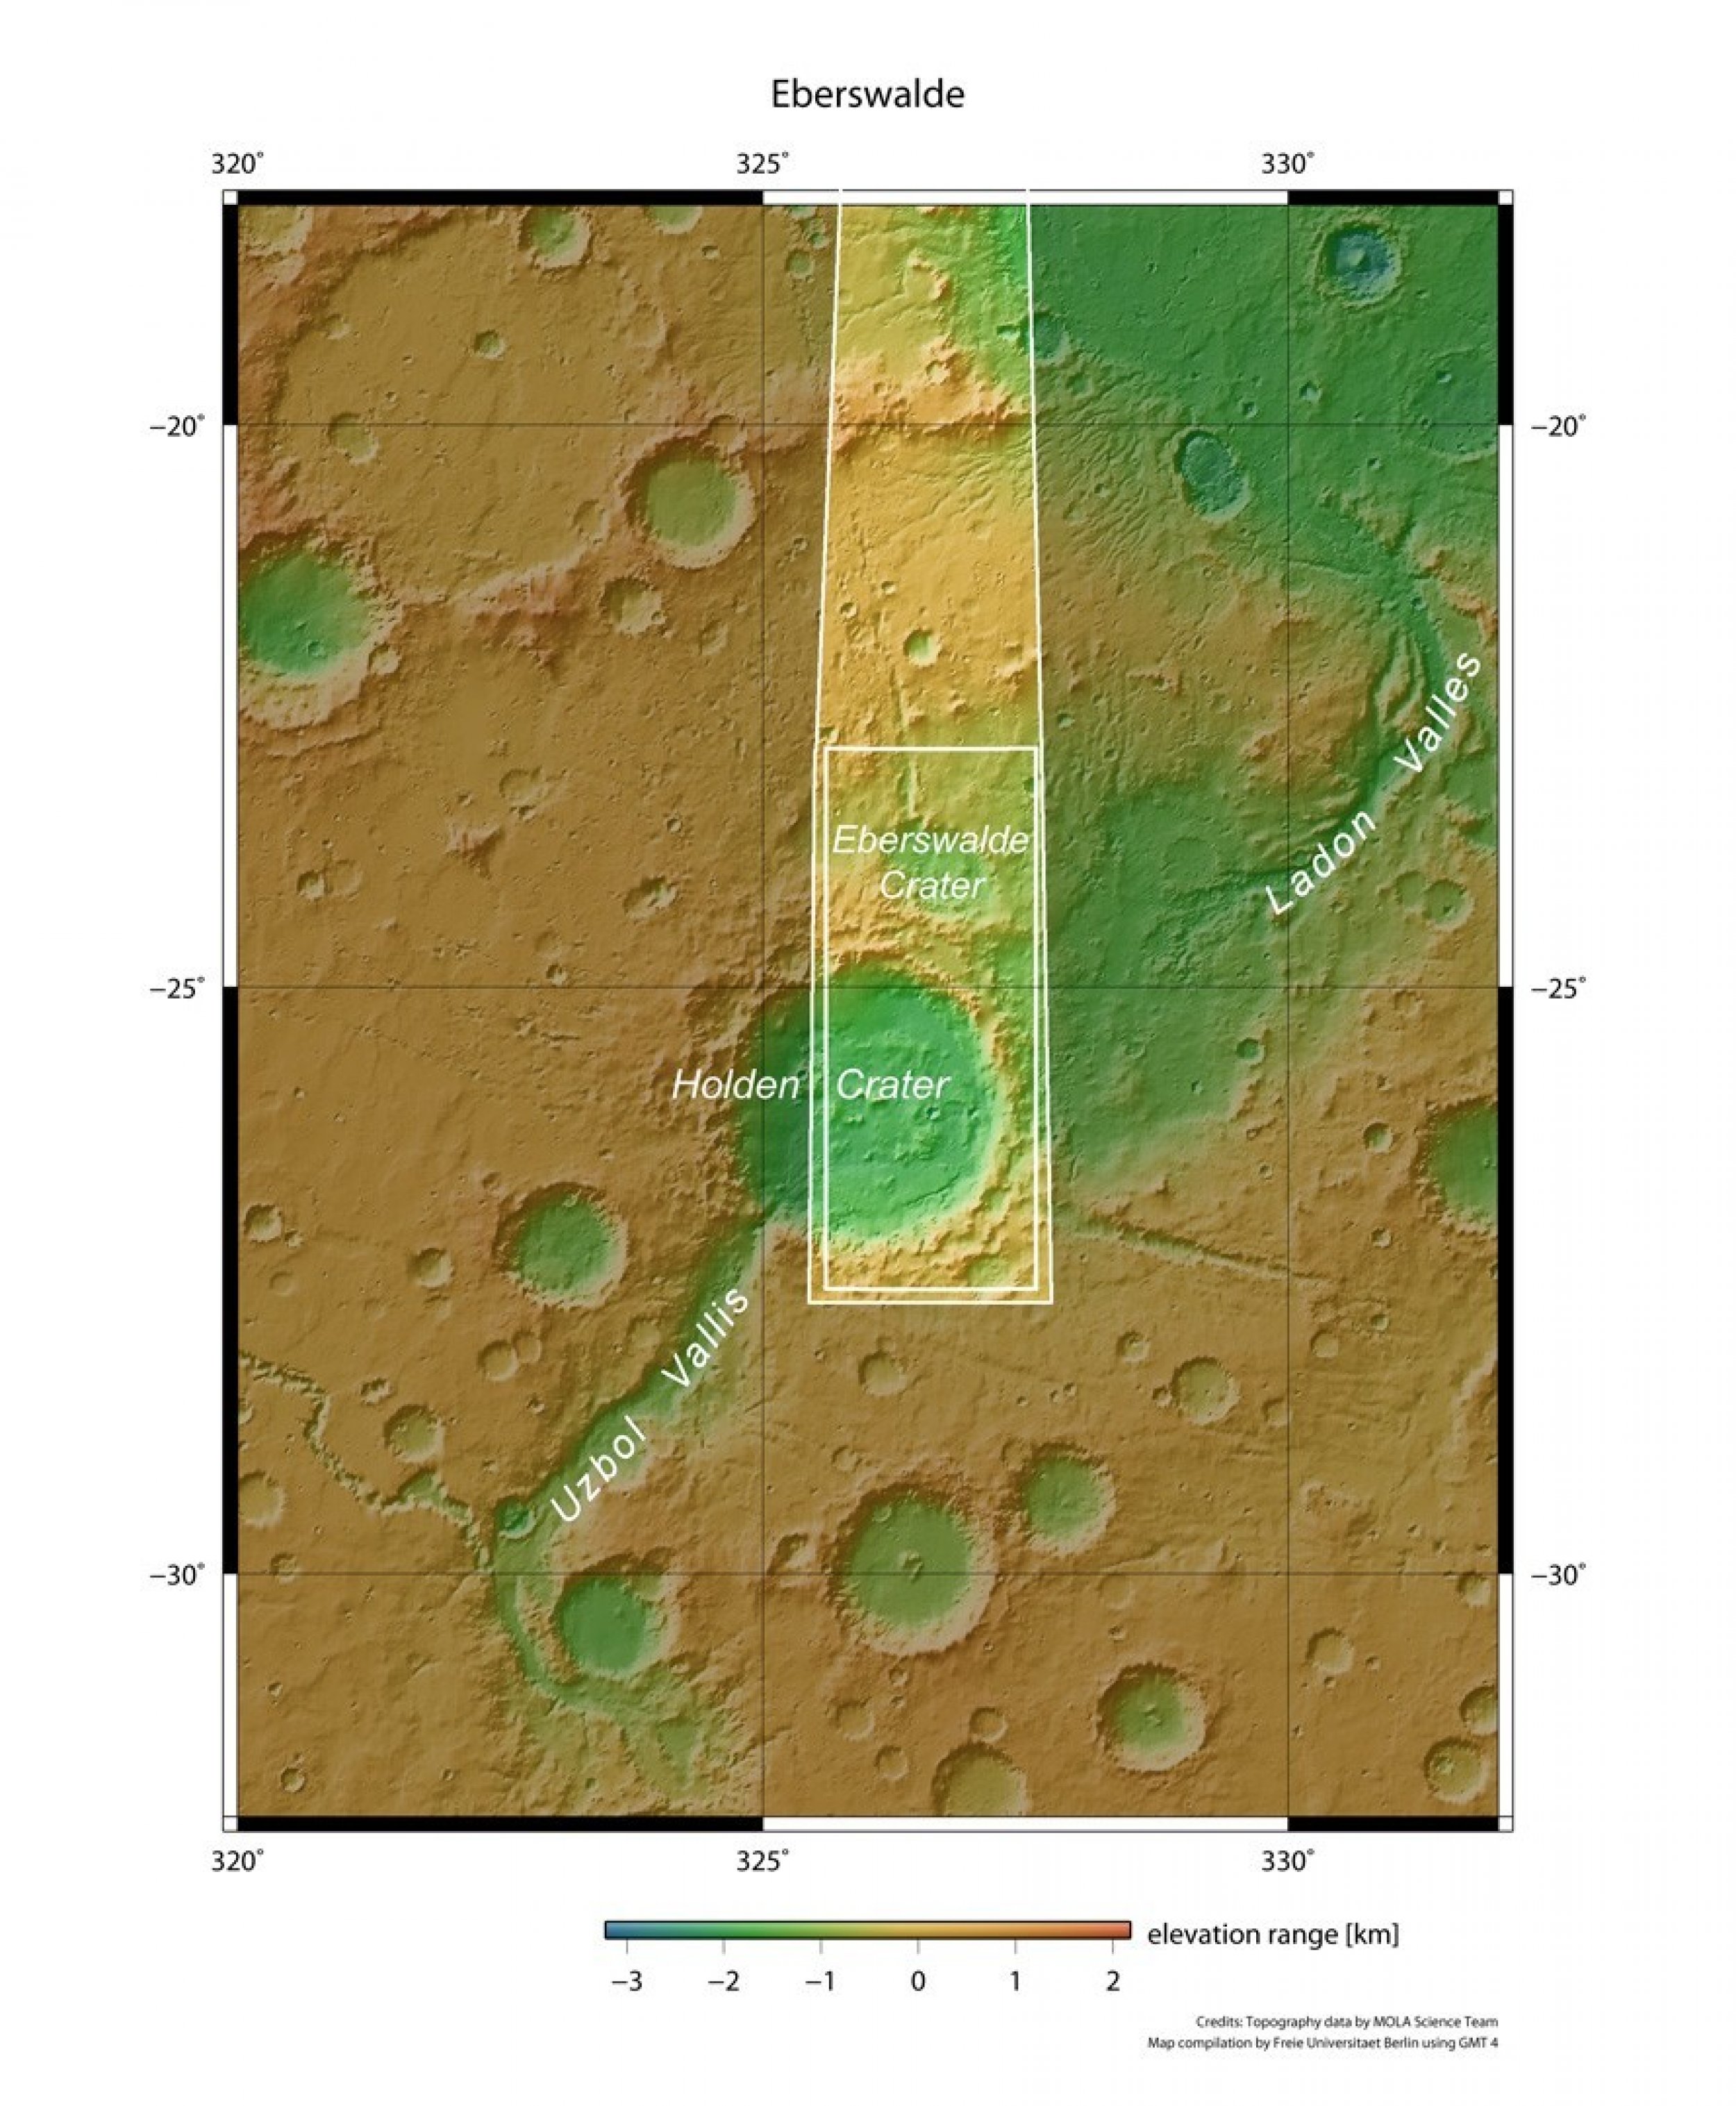 Martian Lakes Remains Found on Mars